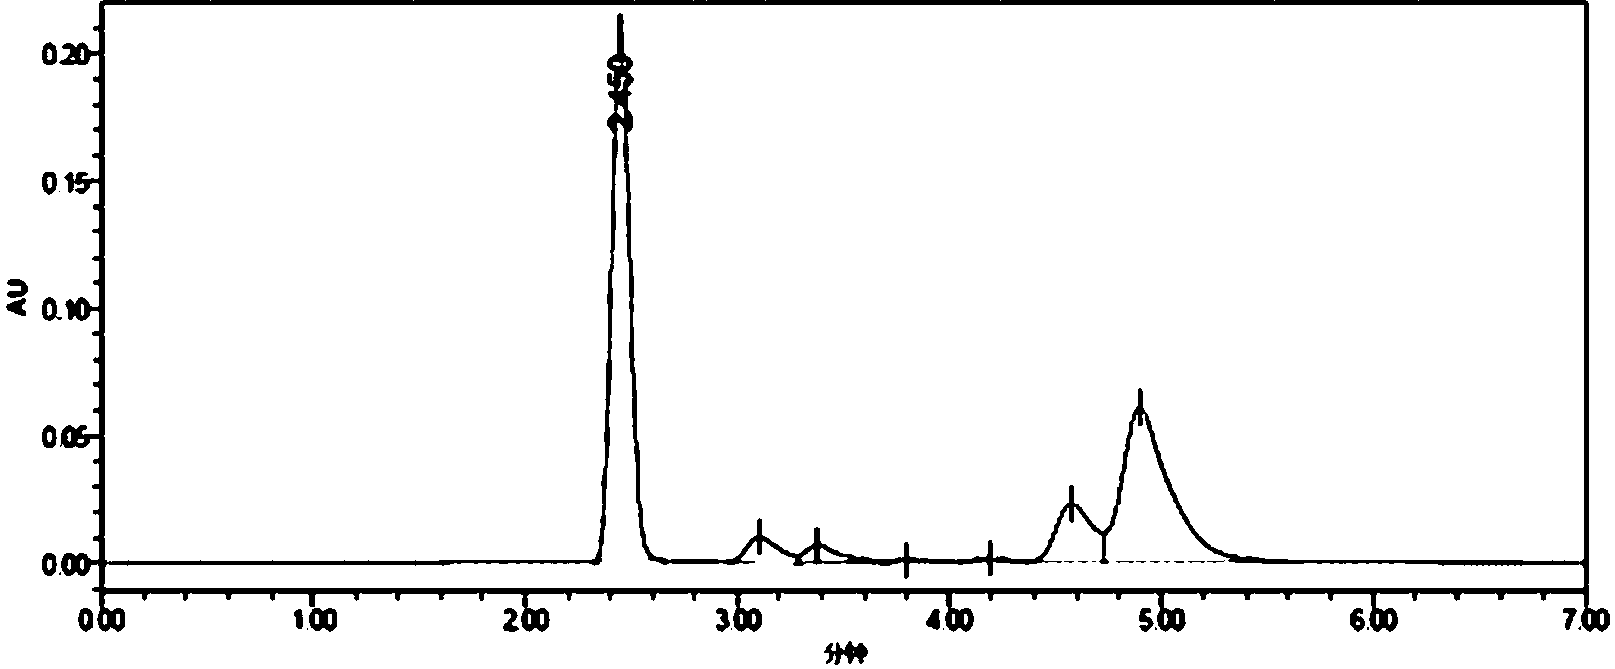 High coupling ratio holoantigen synthesis method of olaquindox residue marker